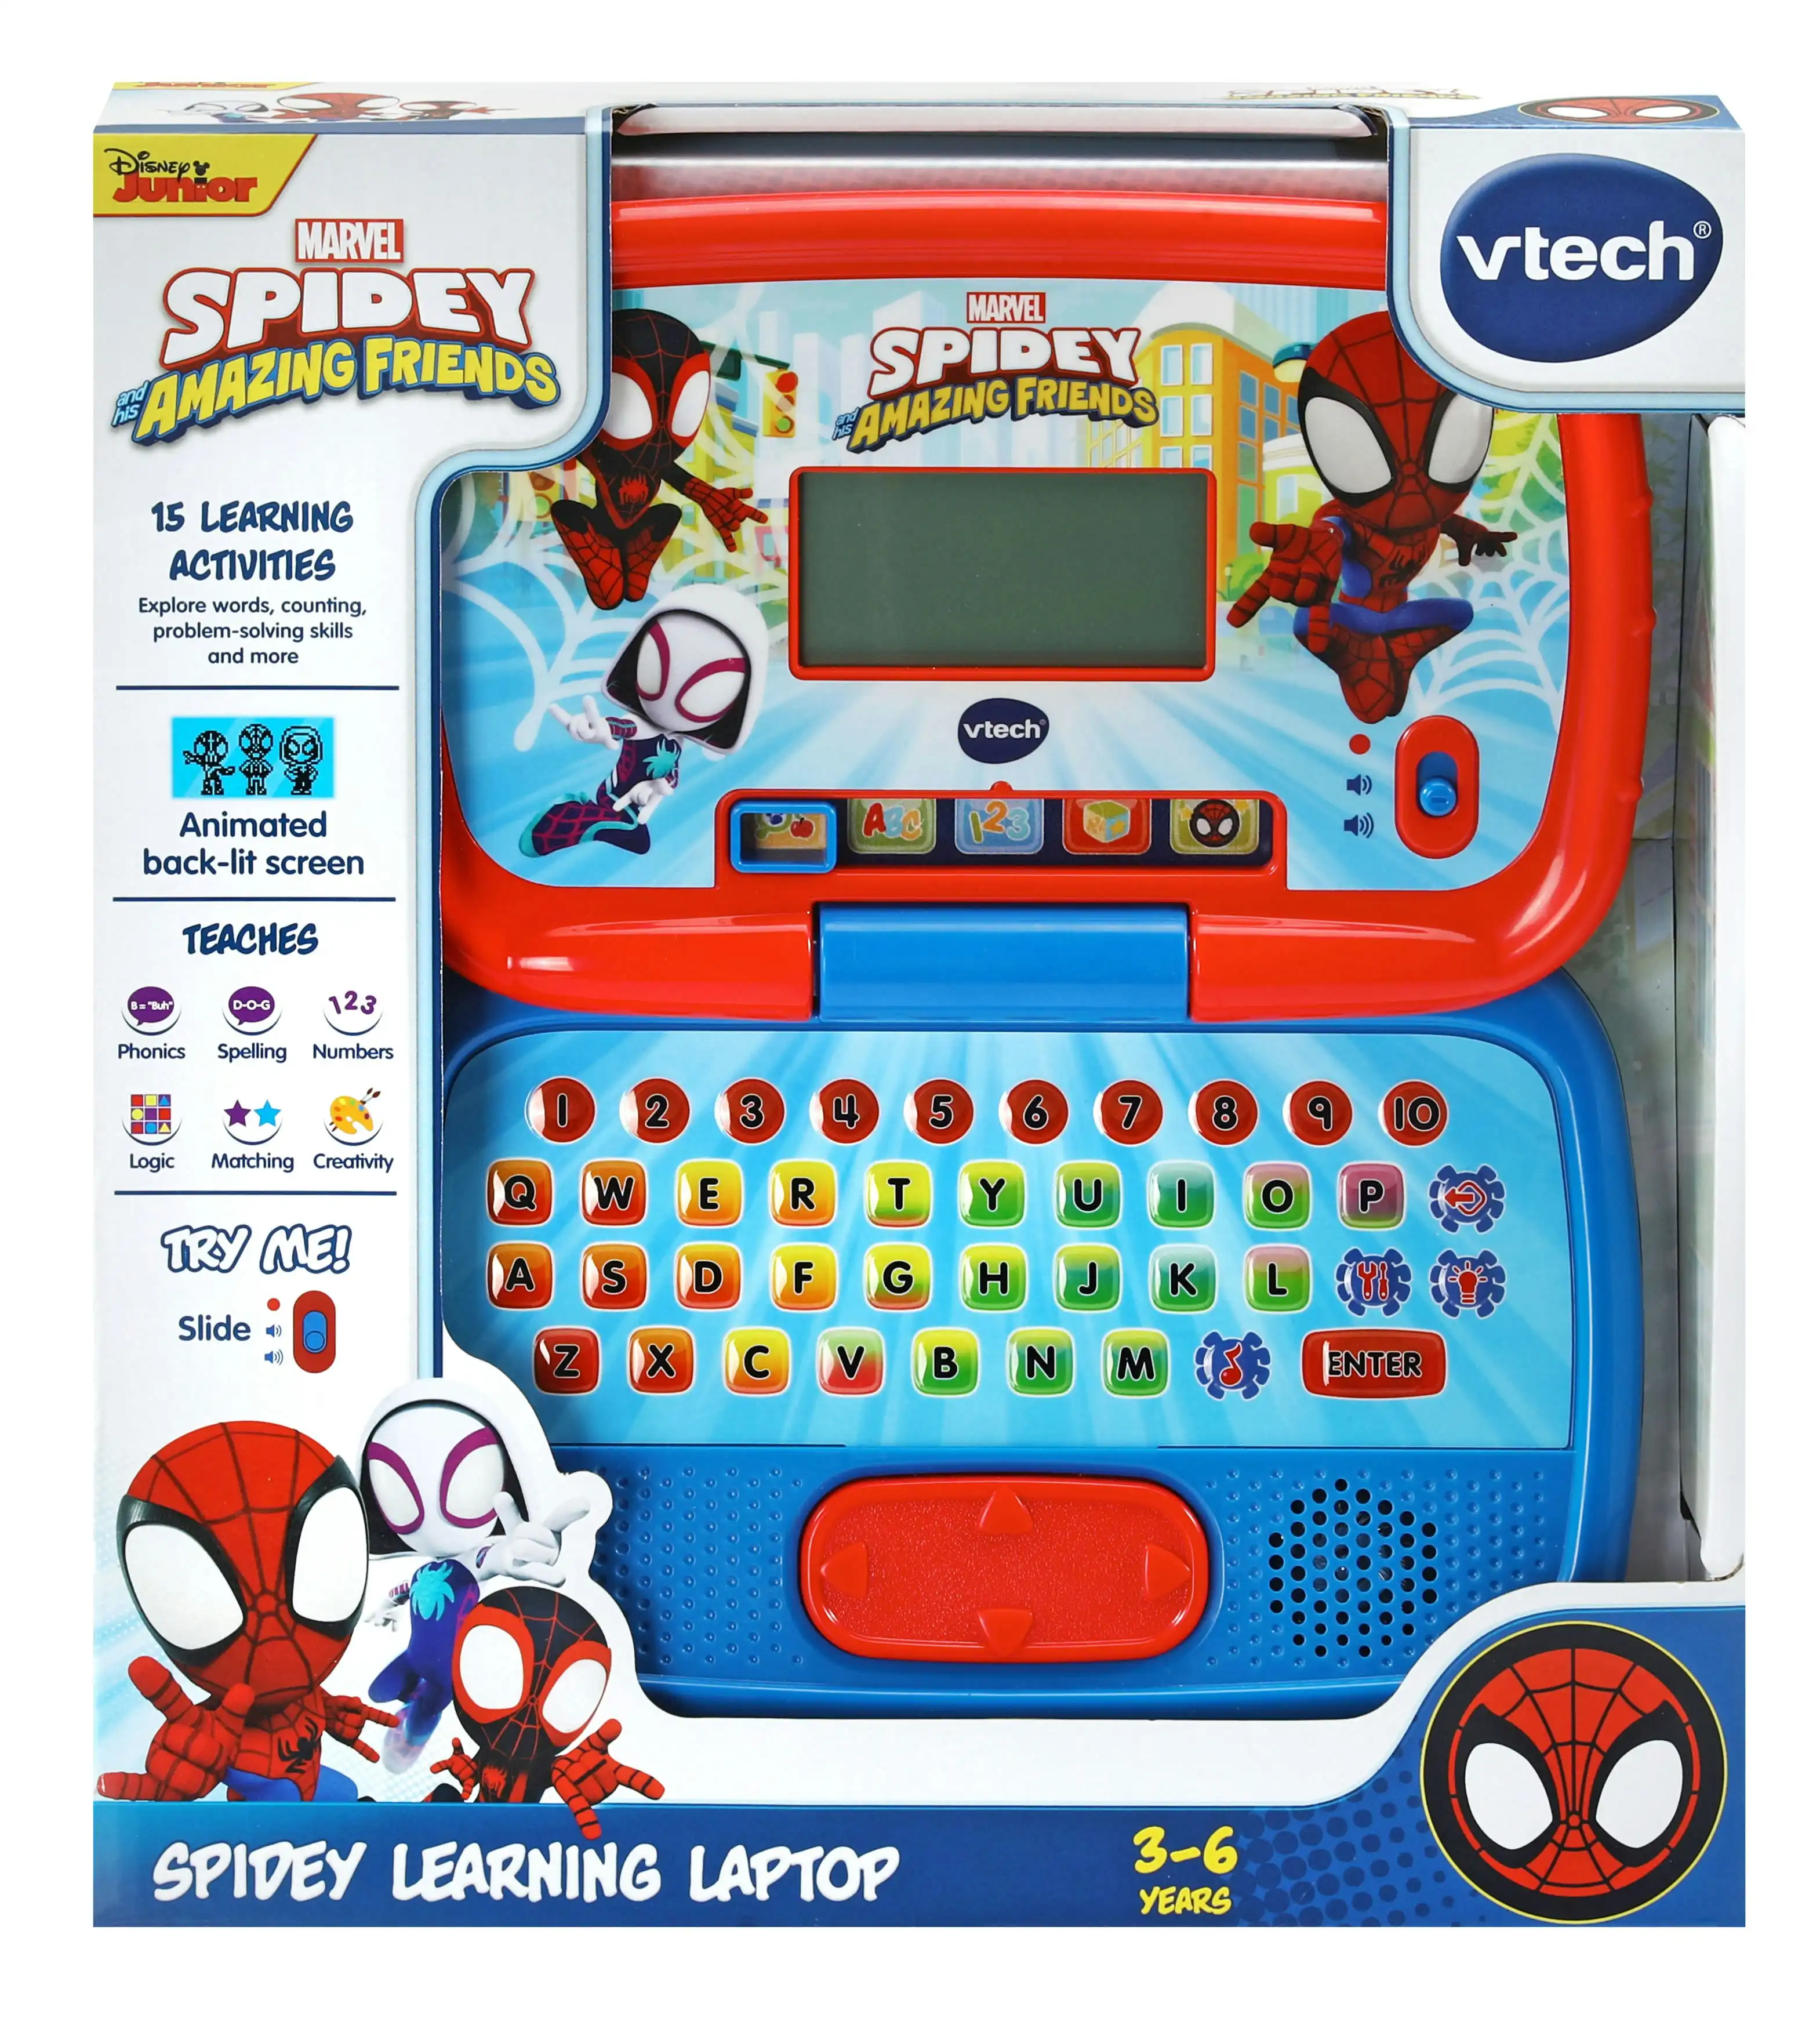 VTech Spidey & His Amazing Friends Spidey Learning Laptop